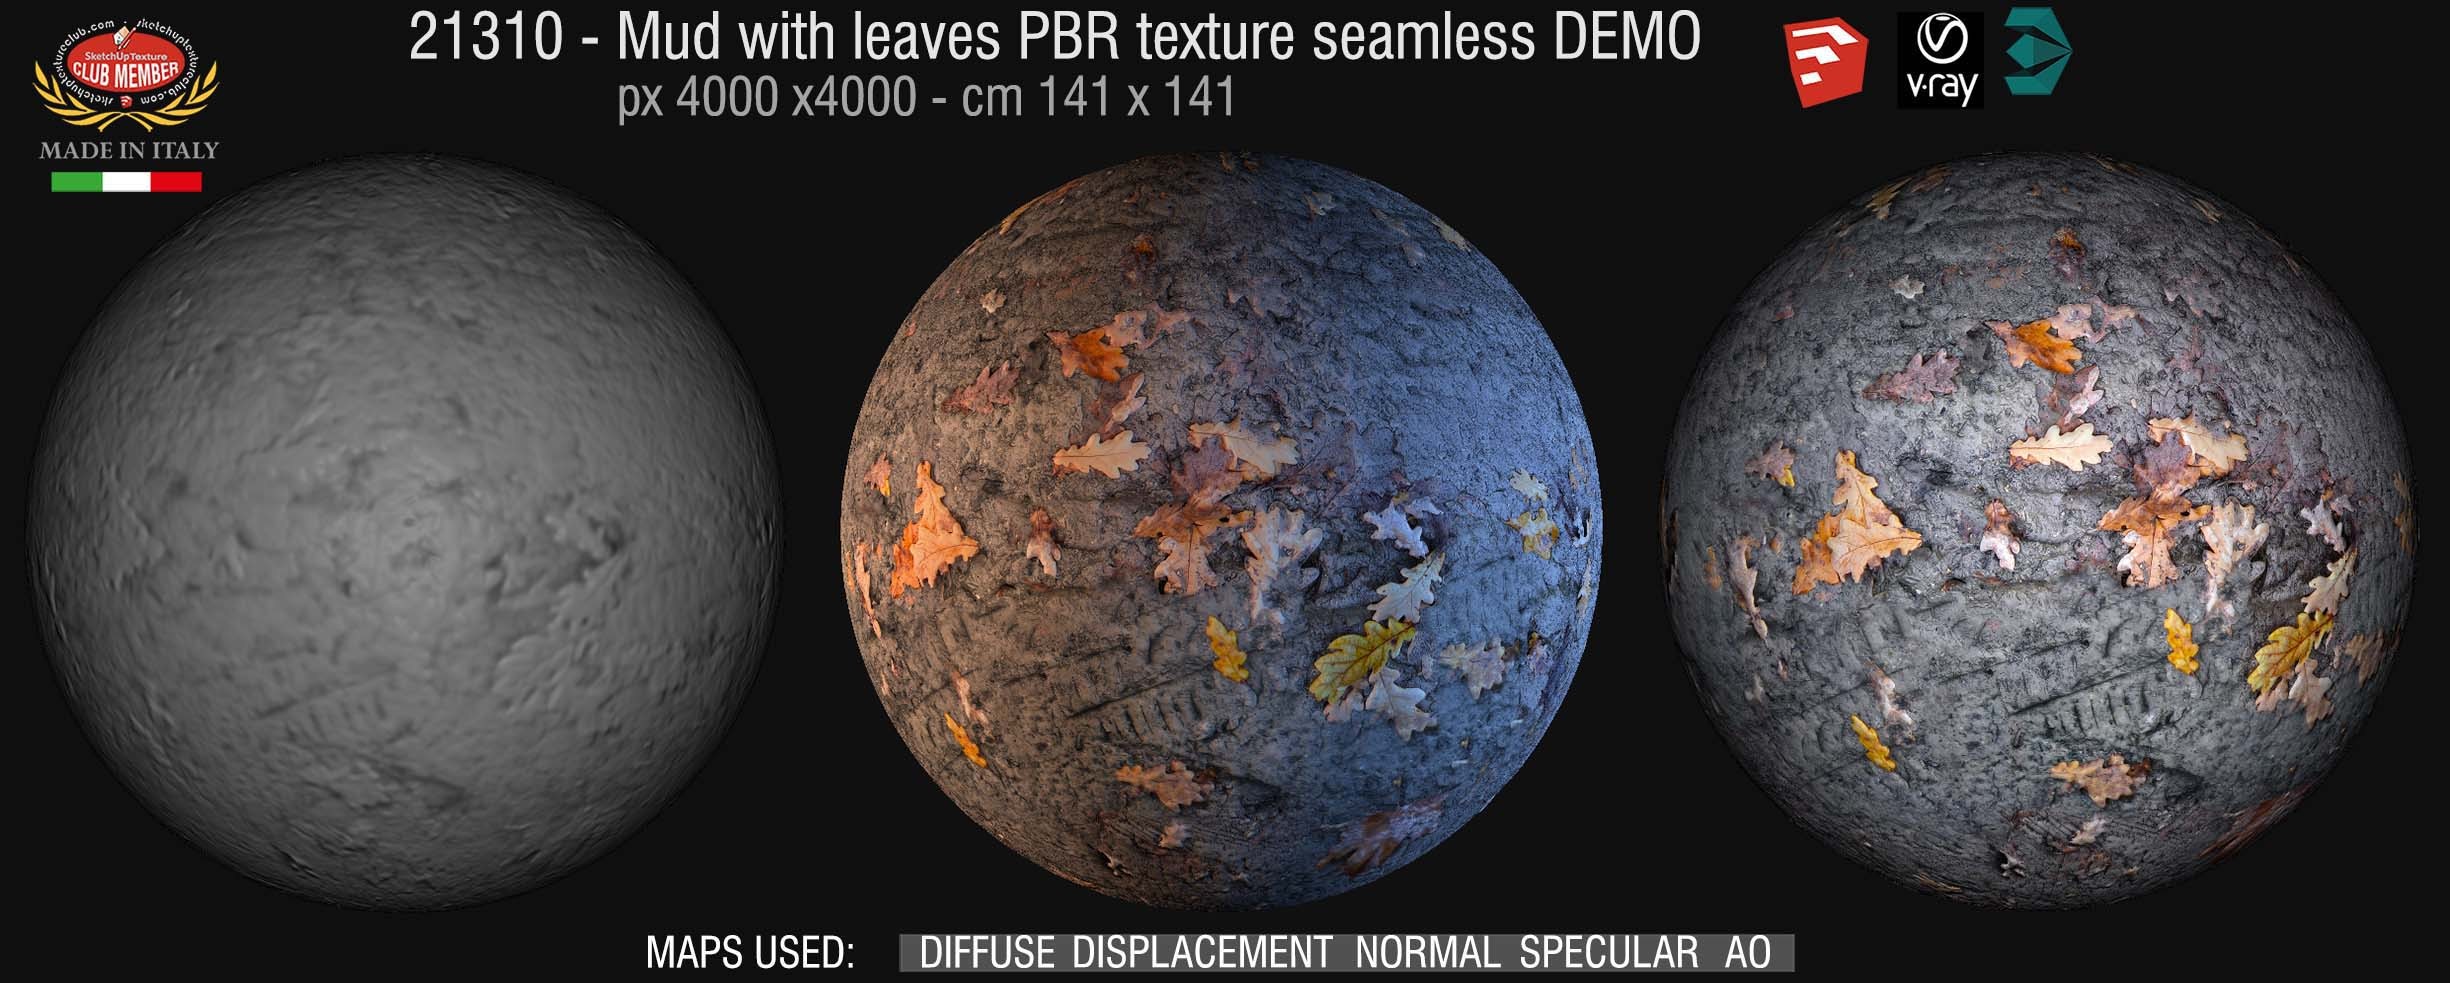 21310 Mud with leaves PBR texture seamless DEMO